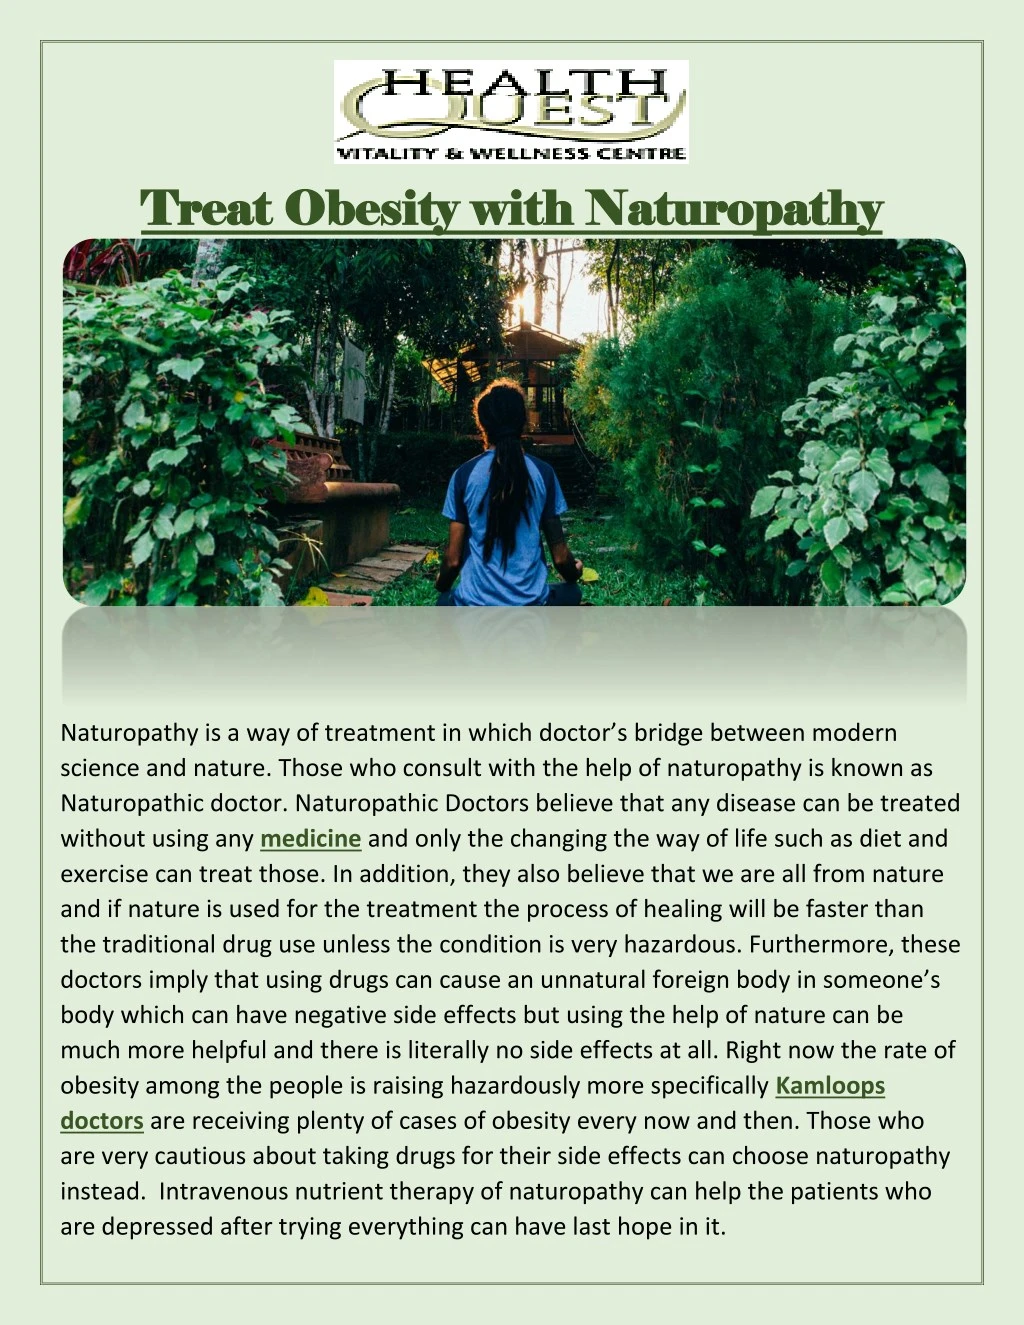 treat obesity with treat obesity with naturopathy